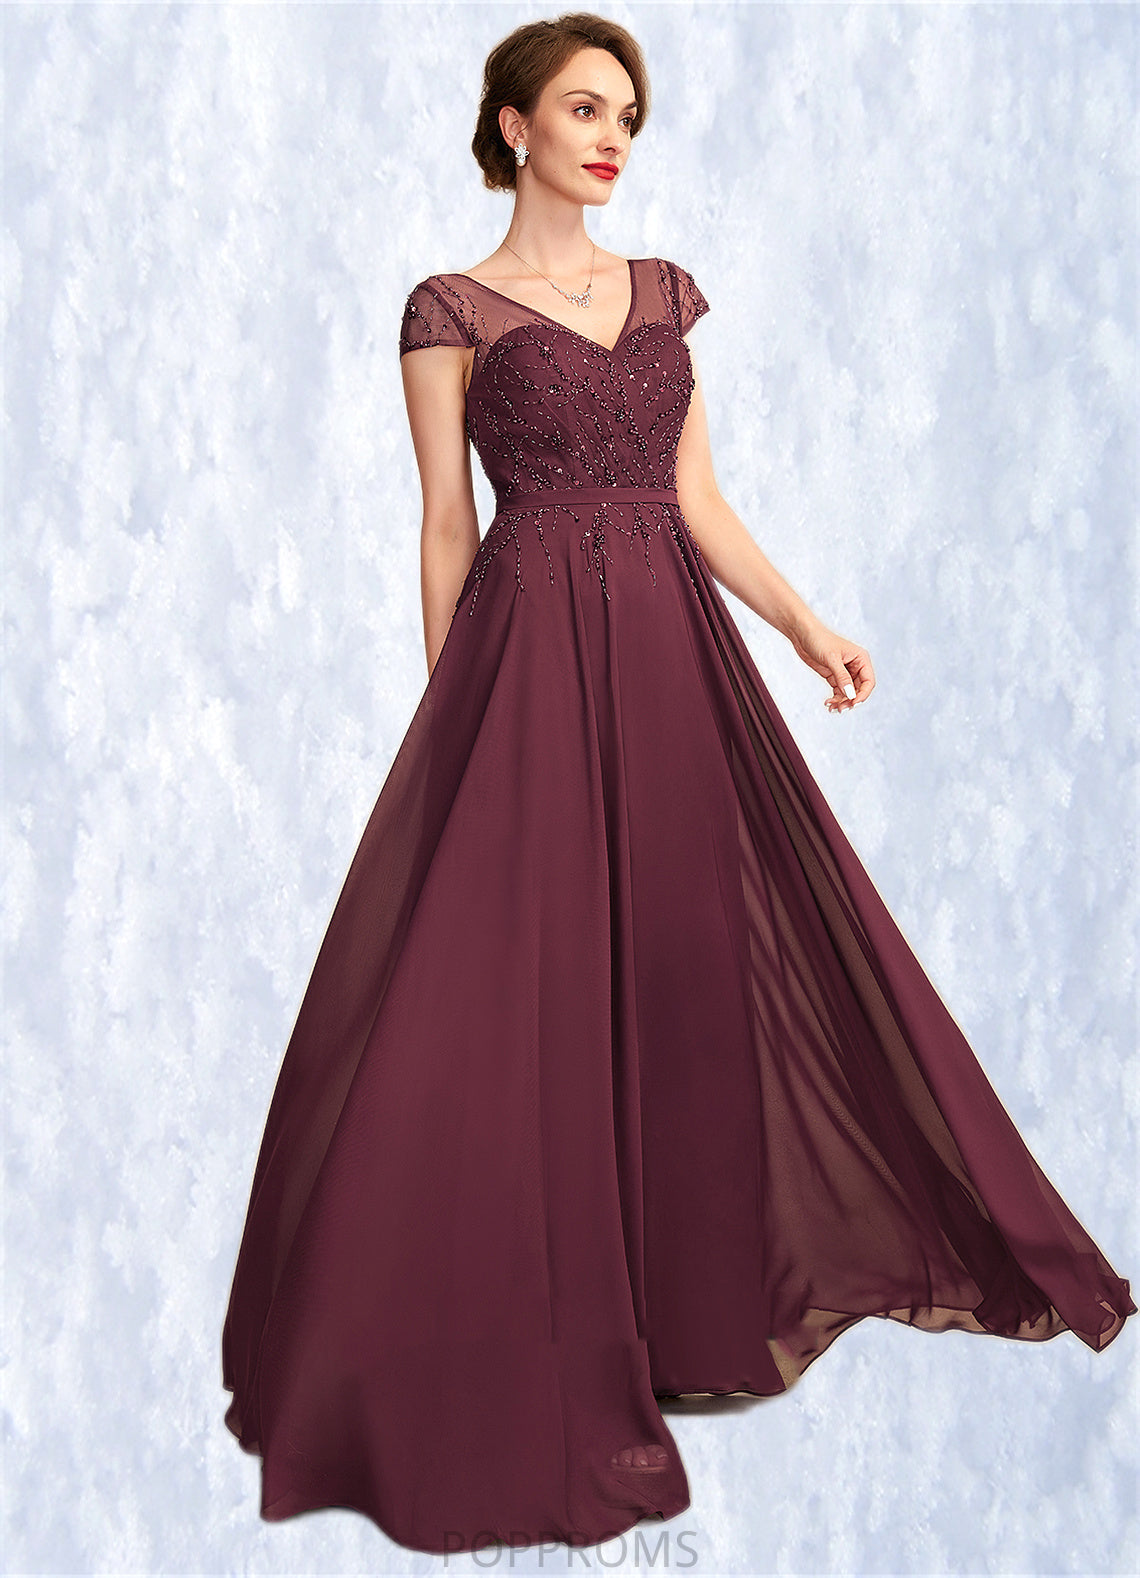 Ingrid A-Line V-neck Floor-Length Chiffon Mother of the Bride Dress With Beading Sequins PP6126P0015028